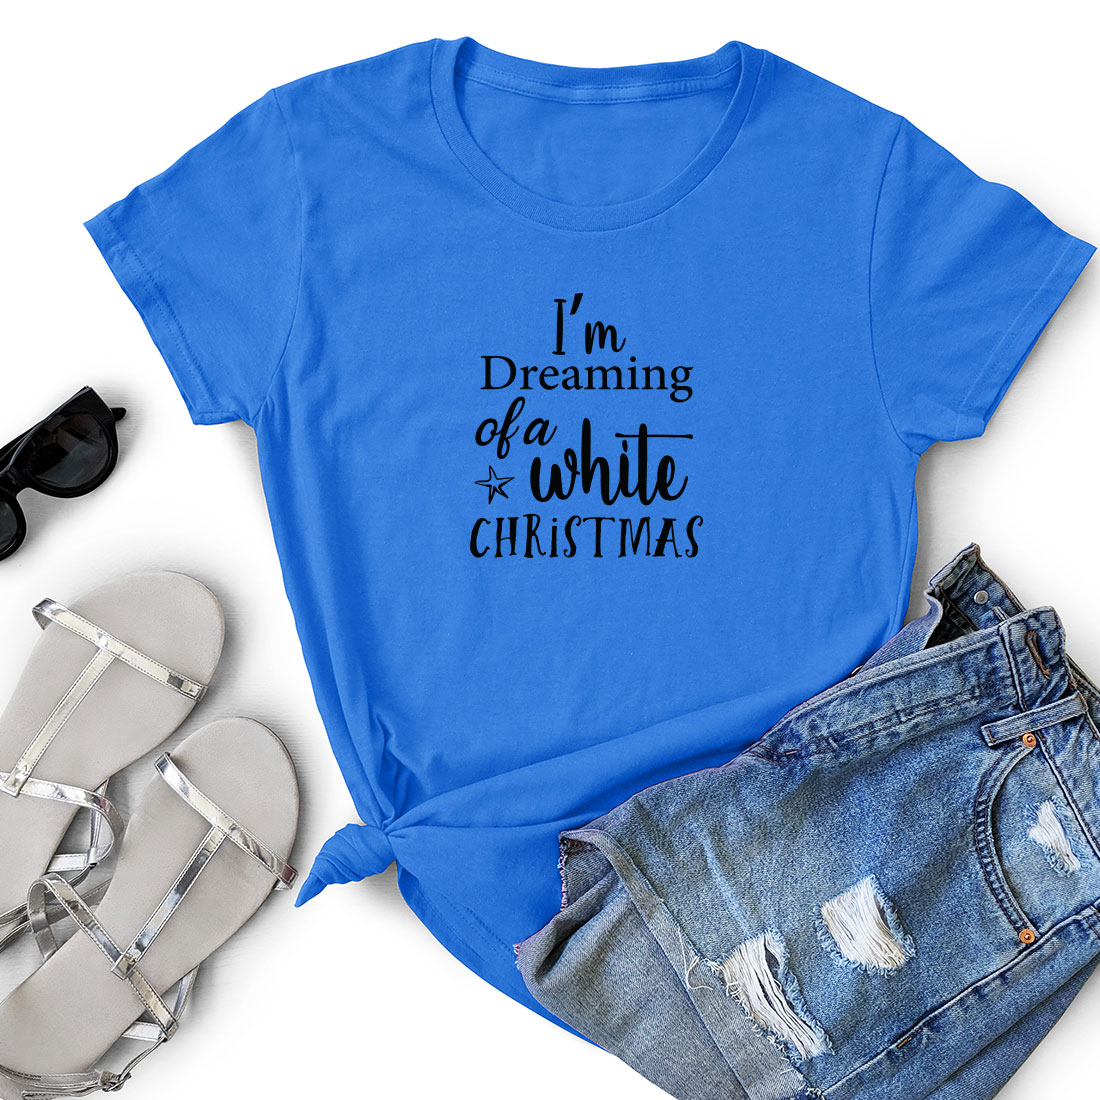 T - shirt that says i'm dreaming of a white christmas.